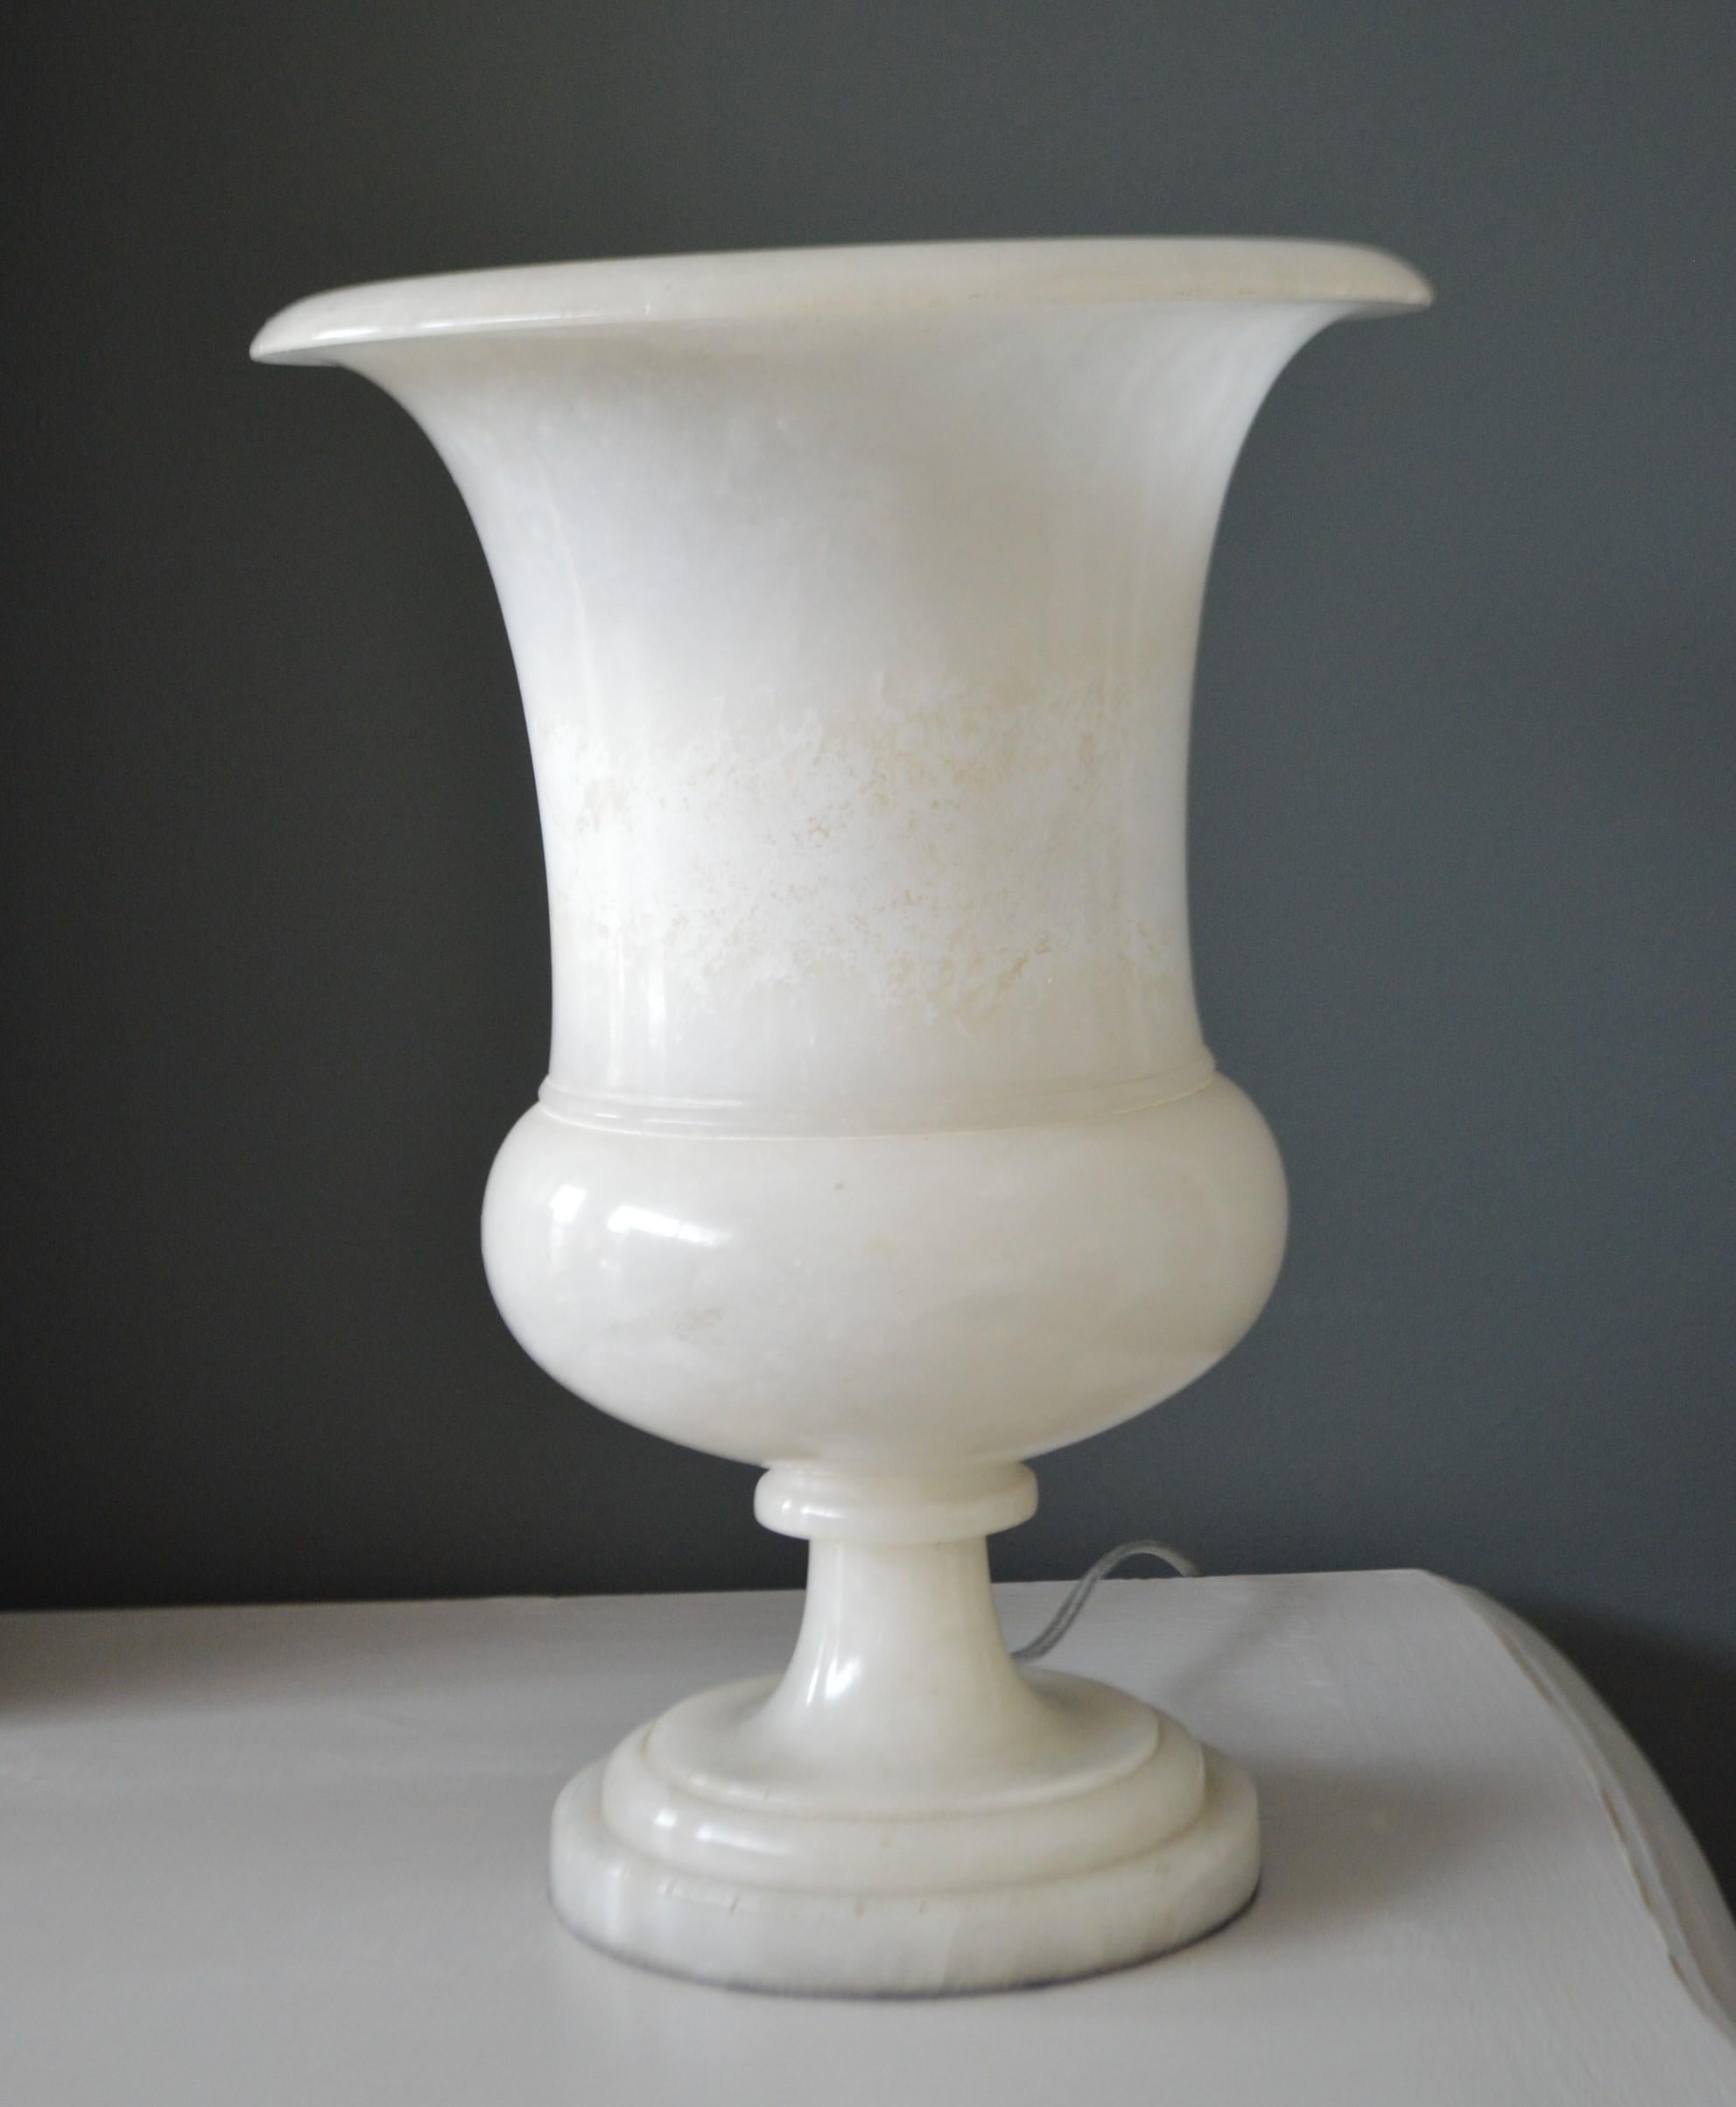 20th Century Pair of Art Deco Period White Marble Urns Converted to Table Lamps